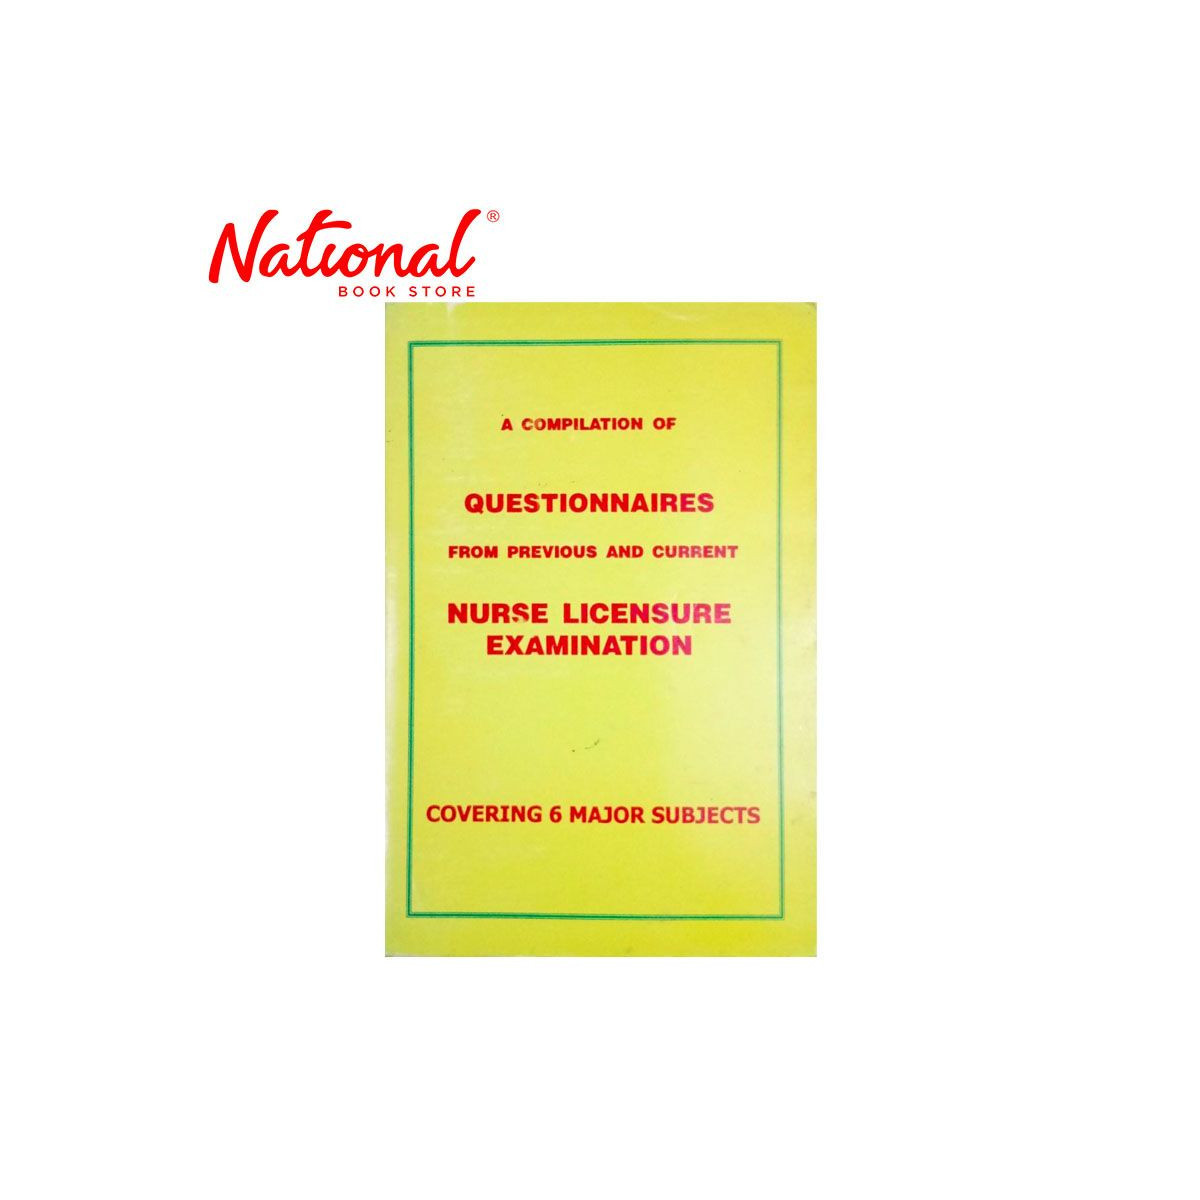 Nurse Licensure Exam Covering Six Major Subjects by Arellano V. Busto Tradepaper - NLE - PNLE